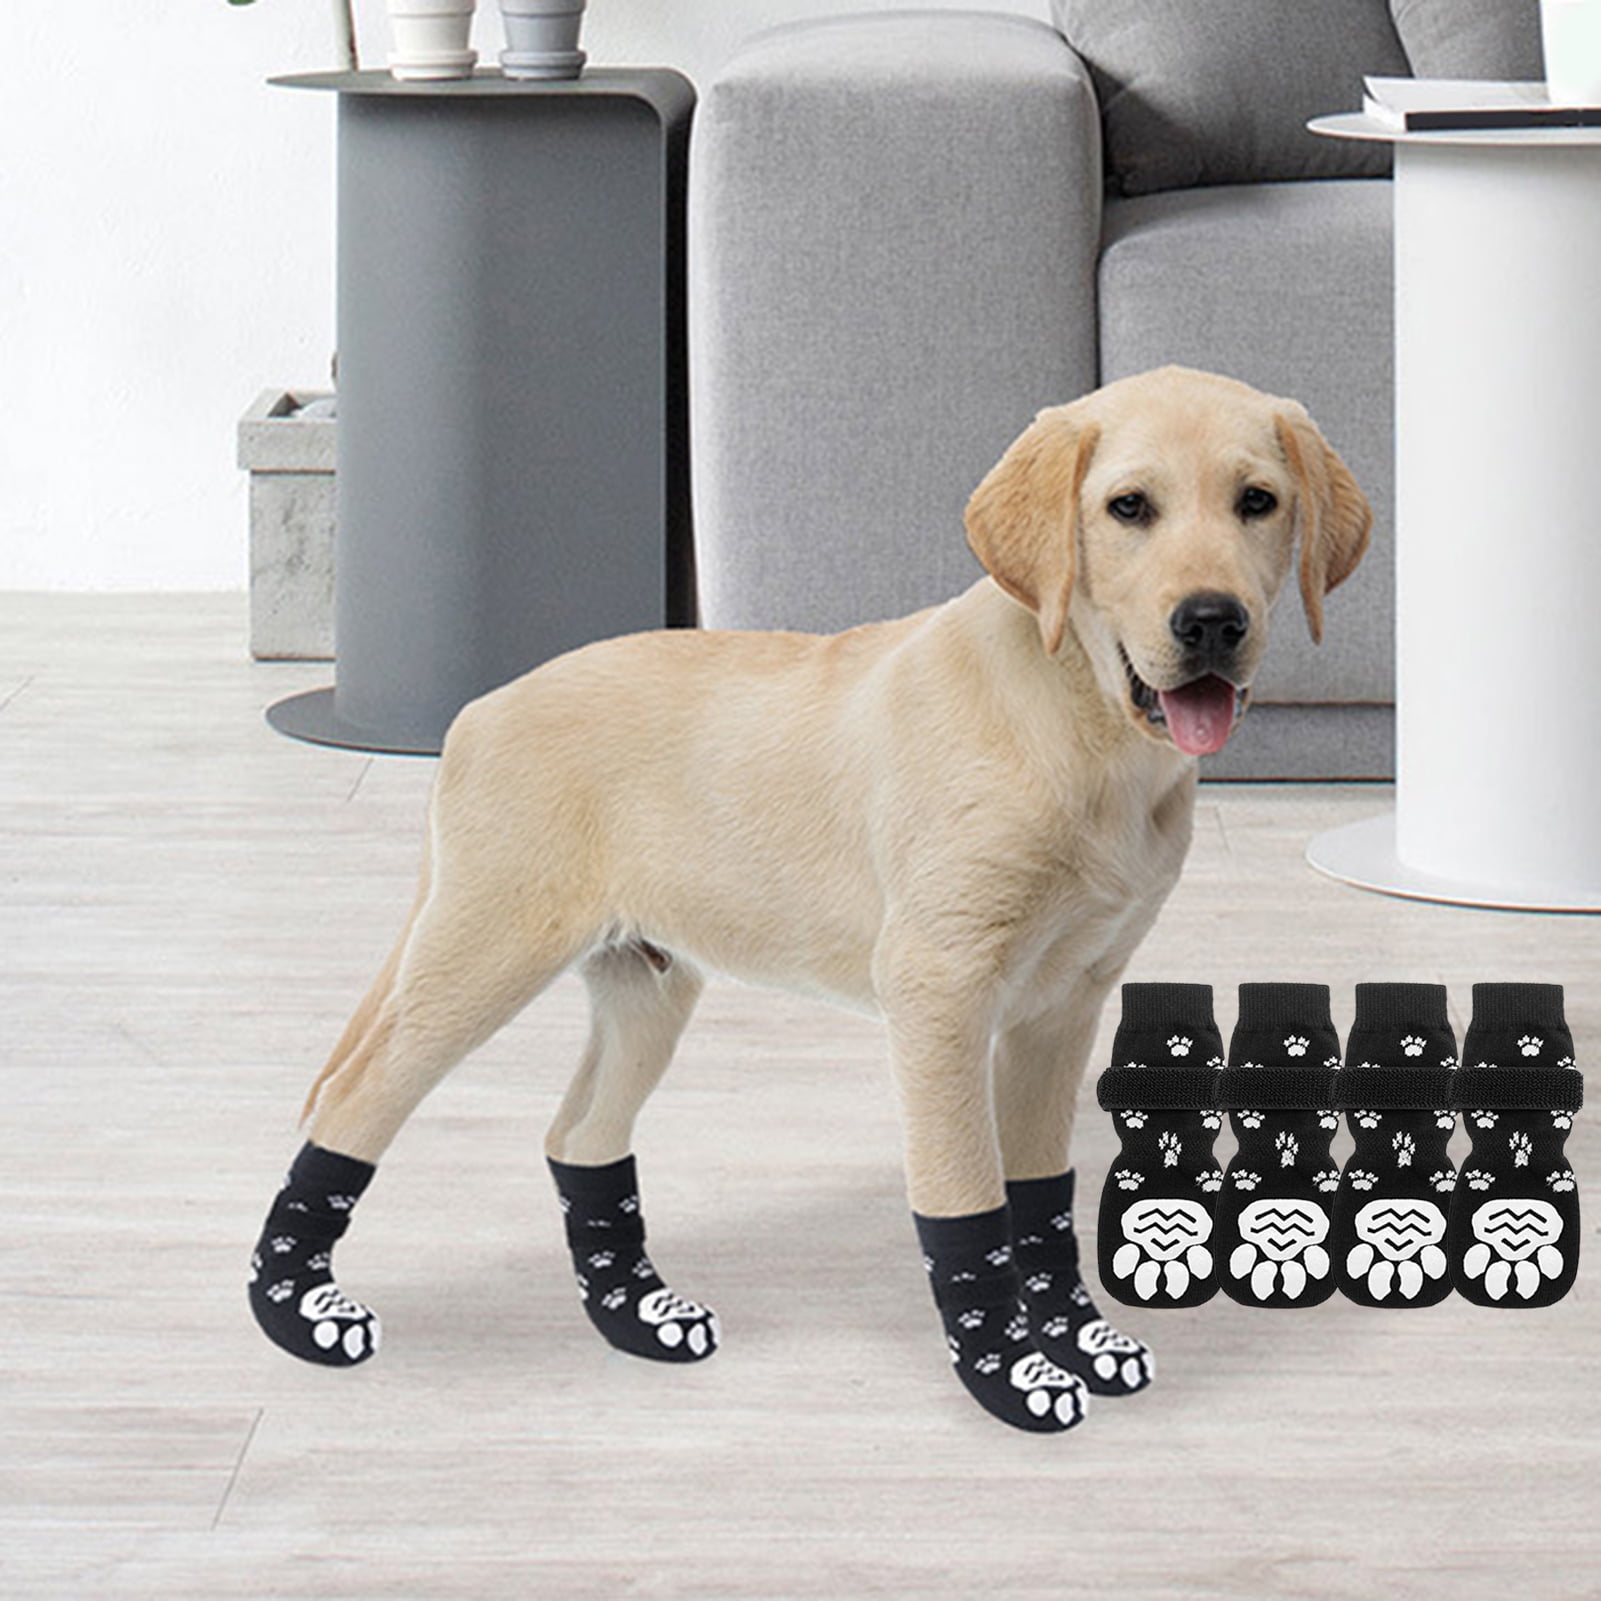 Wirlsweal 4Pcs Dog Socks Super Soft Fastener Tape Non-Slip Breathable  Easy-wearing Decorative Cotton Medium Large Dogs Socks Paw Protector Pet  Supplies 